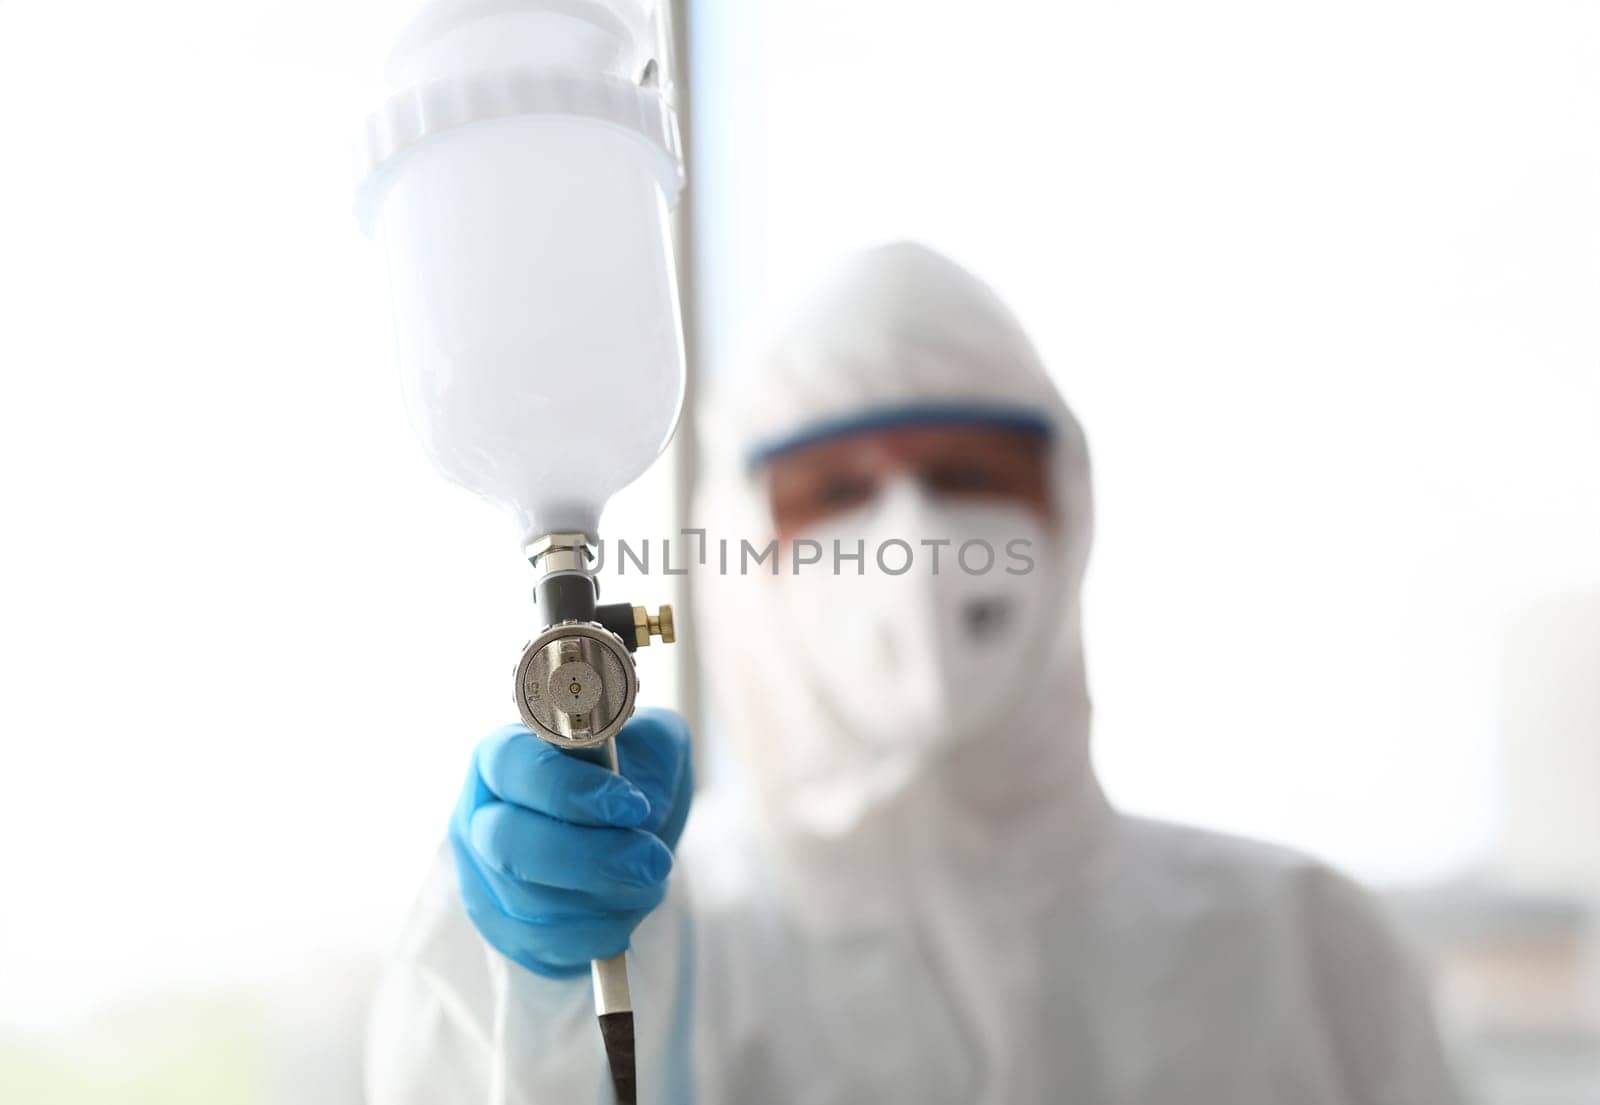 Workman hold in hand sprayer wearing protective suit closeup